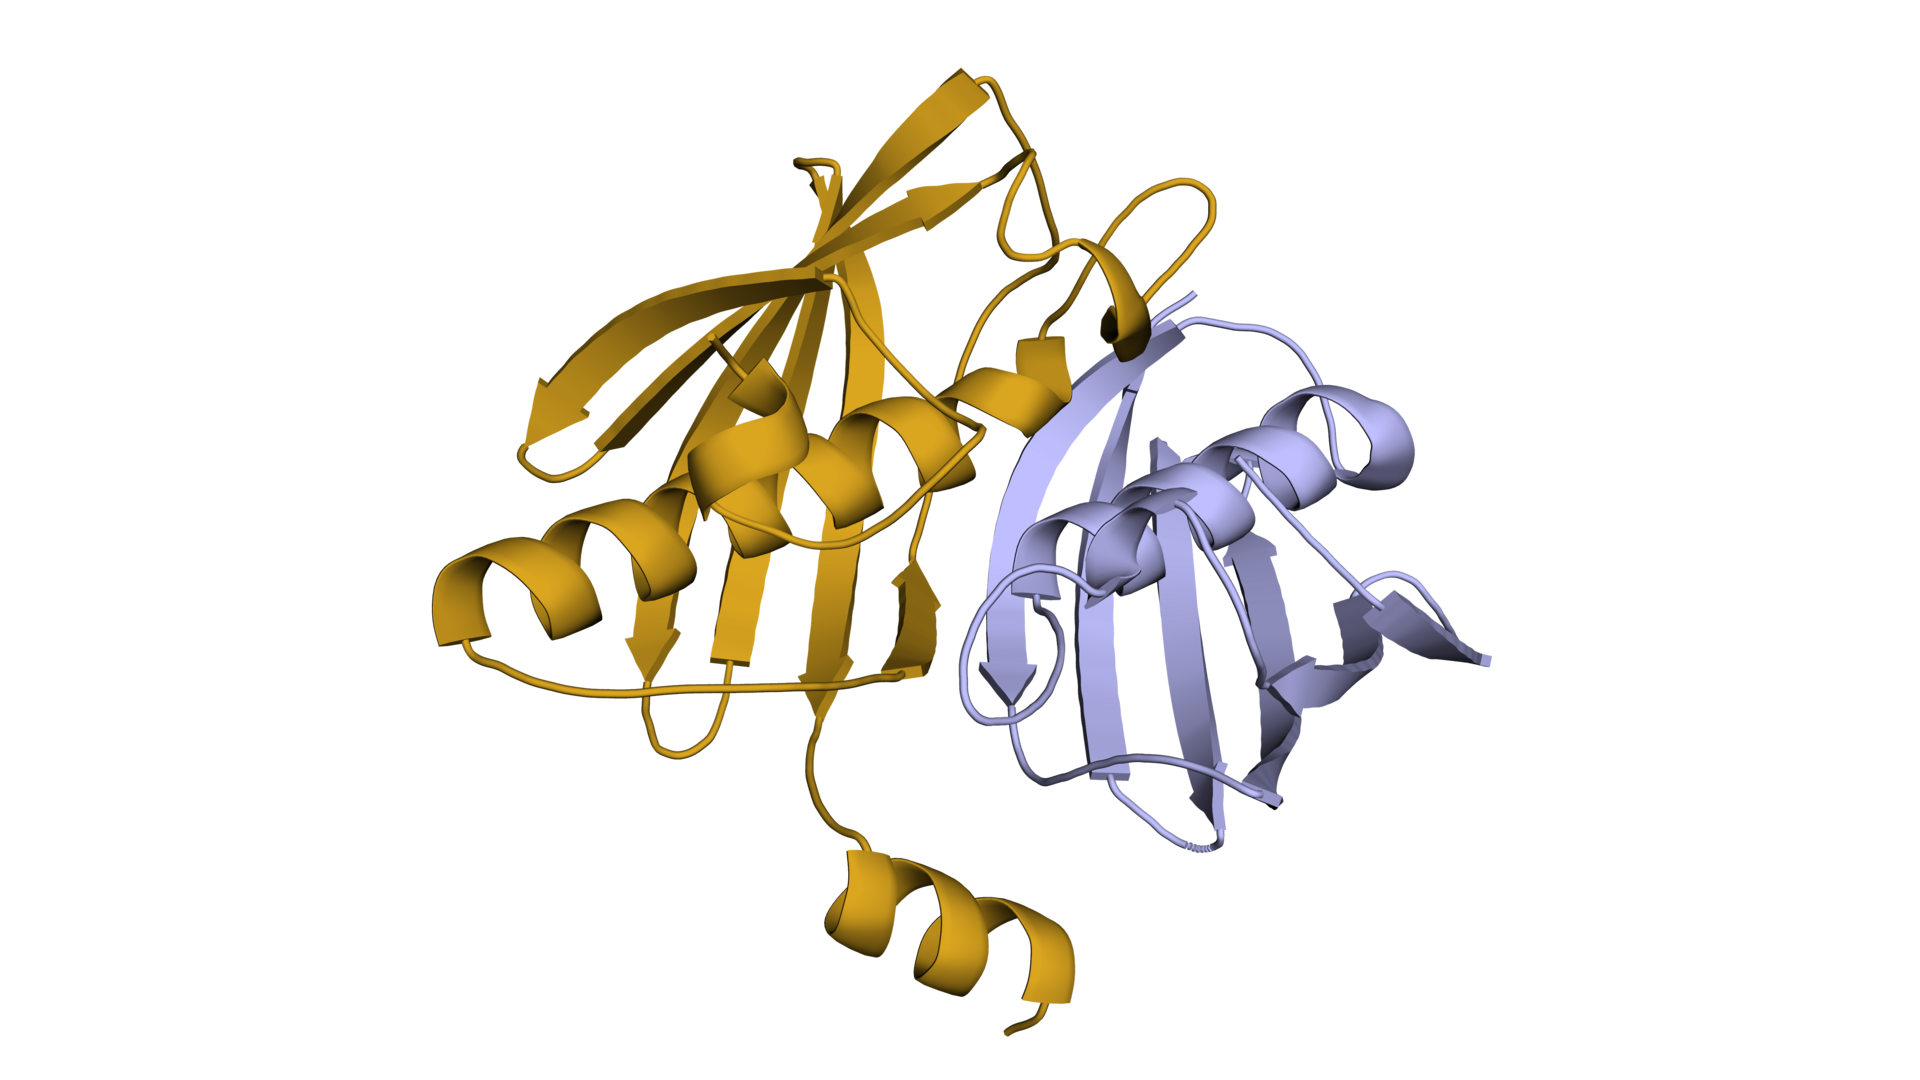 Structure of the ApeI-ApeP enzyme complex, which plays a key role in the assembly of bacterial arylpolyene pigments. 